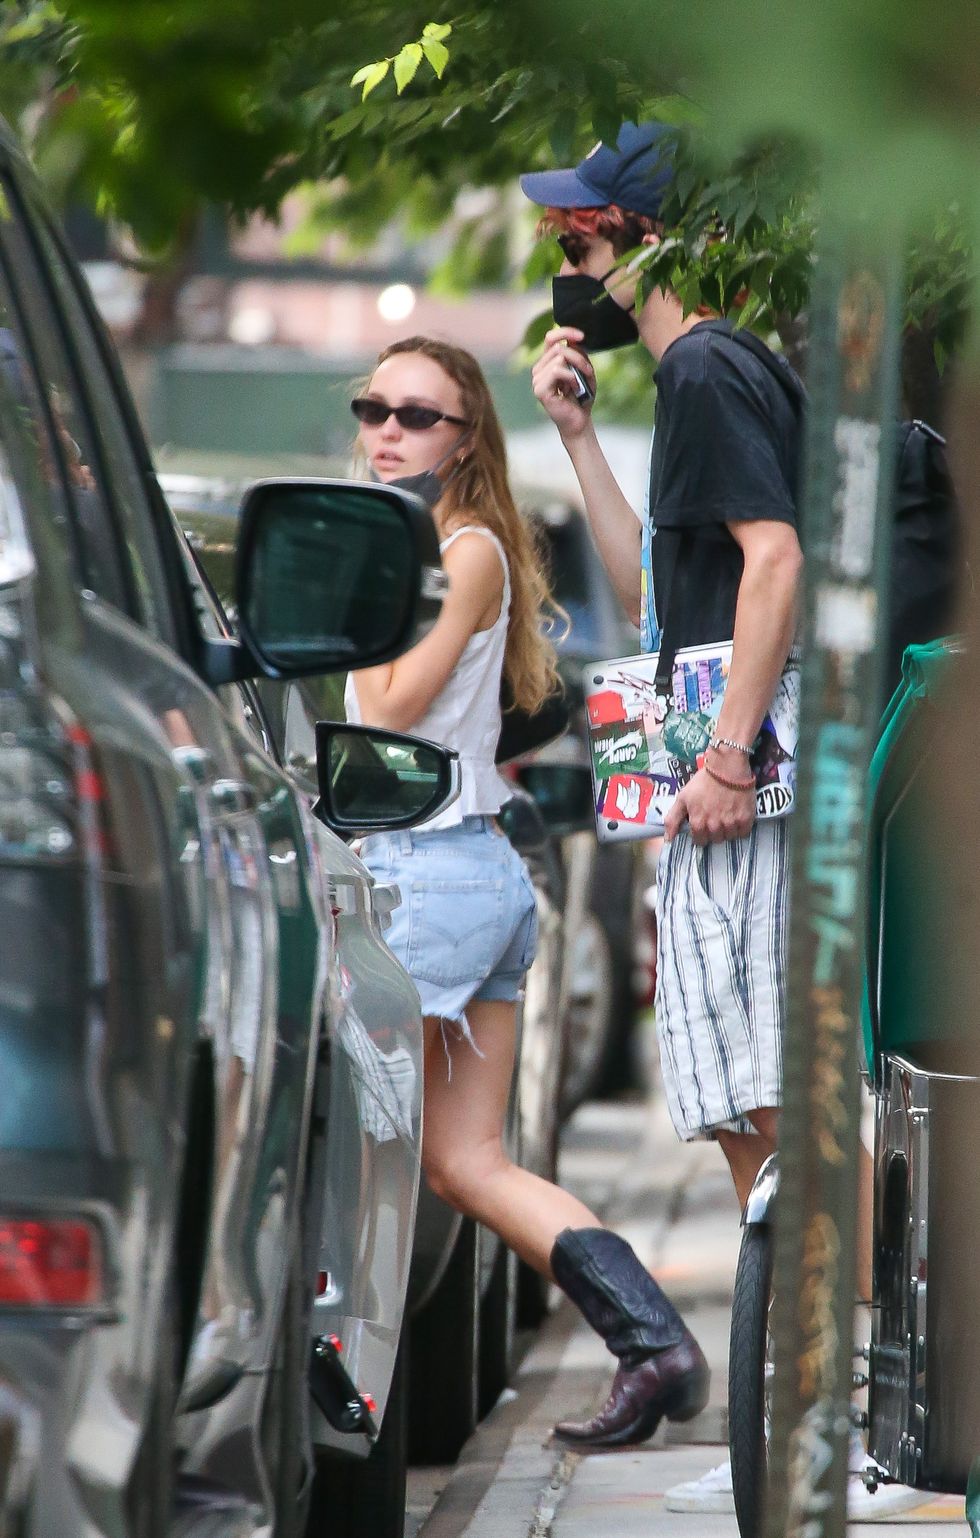 06282021 exclusive timothee chalamet and lily rose depp are pictured back together in new york city the duo were spotted leaving timothee's apartment and seemingly confirming reconciliation rumours after previously dating in 2018 19 salestheimagedirectcom please bylinetheimagedirectcomexclusive please email salestheimagedirectcom for fees before use